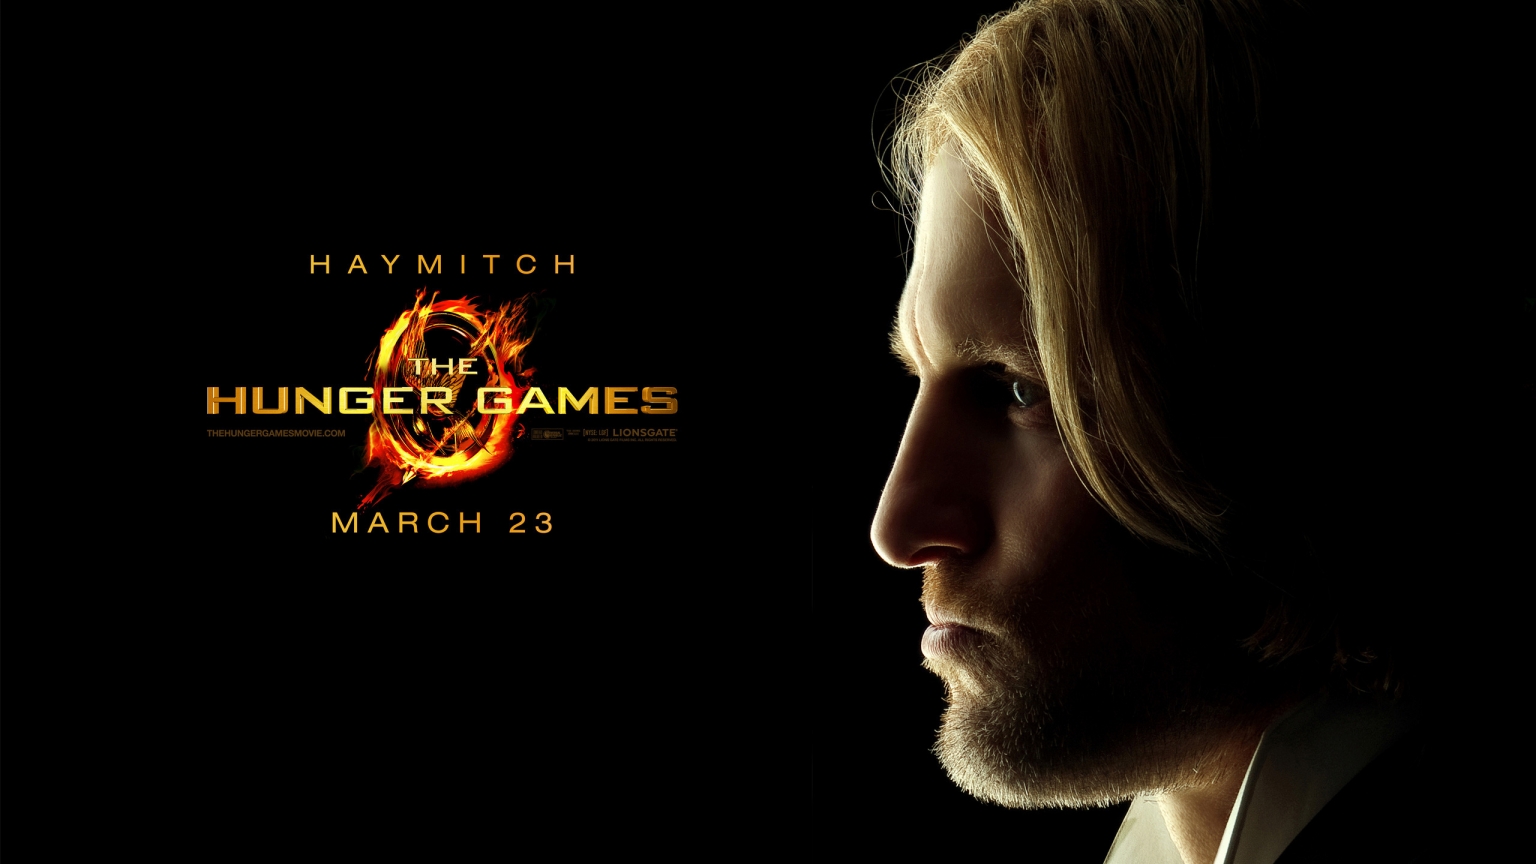 The Hunger Games Haymitch for 1536 x 864 HDTV resolution